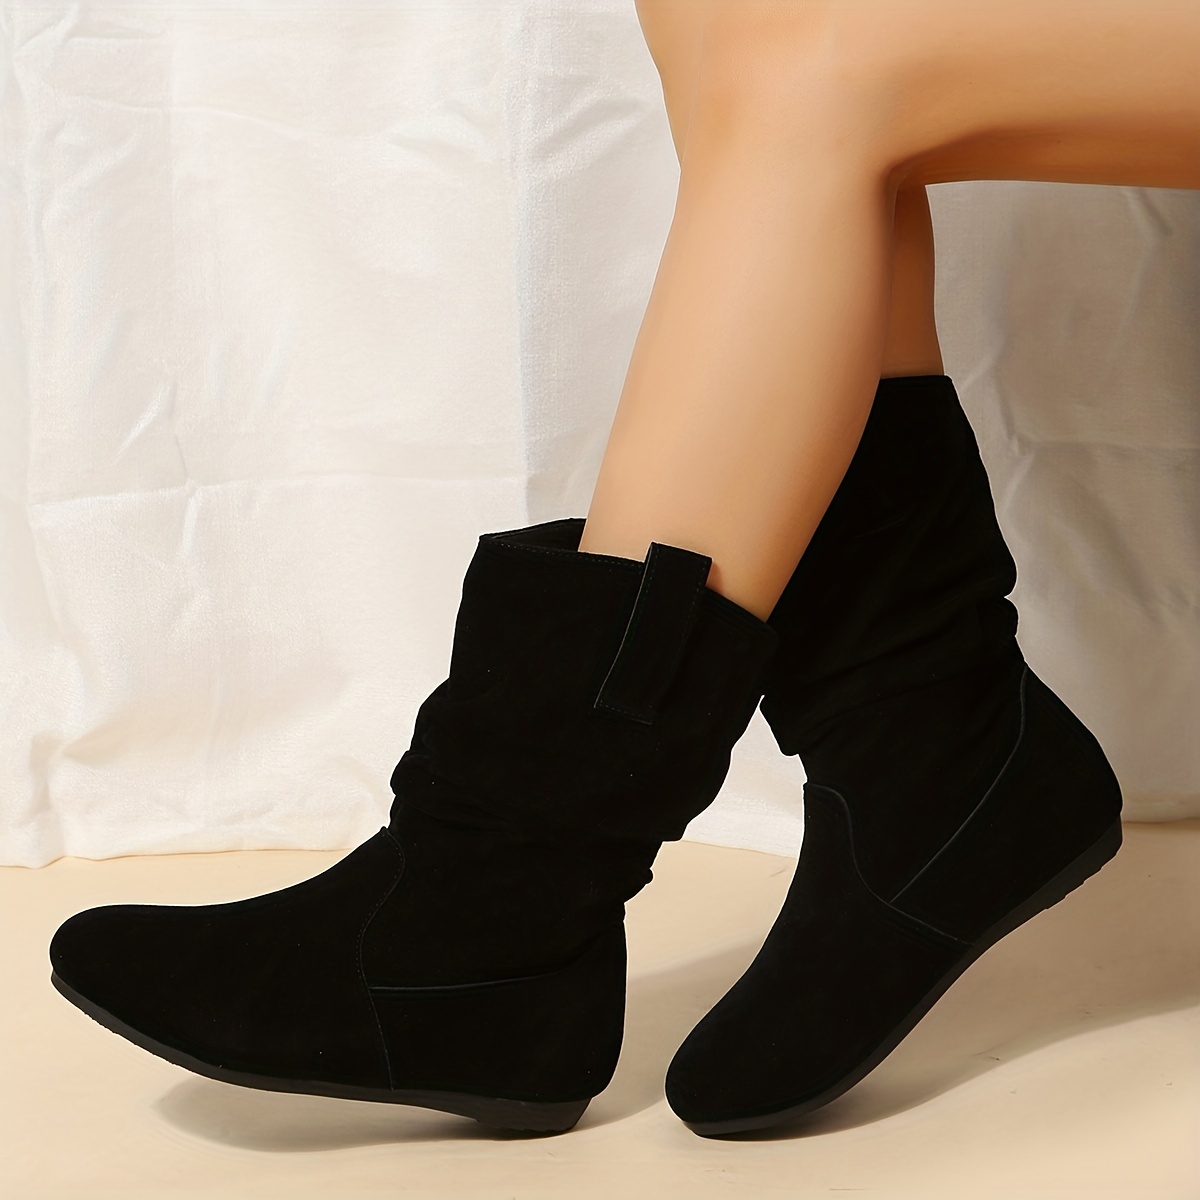 

Women's Solid Color Boots, Slip On Round Toe Mid Calf Casual & Trendy Boots, Versatile Comfy Shoes